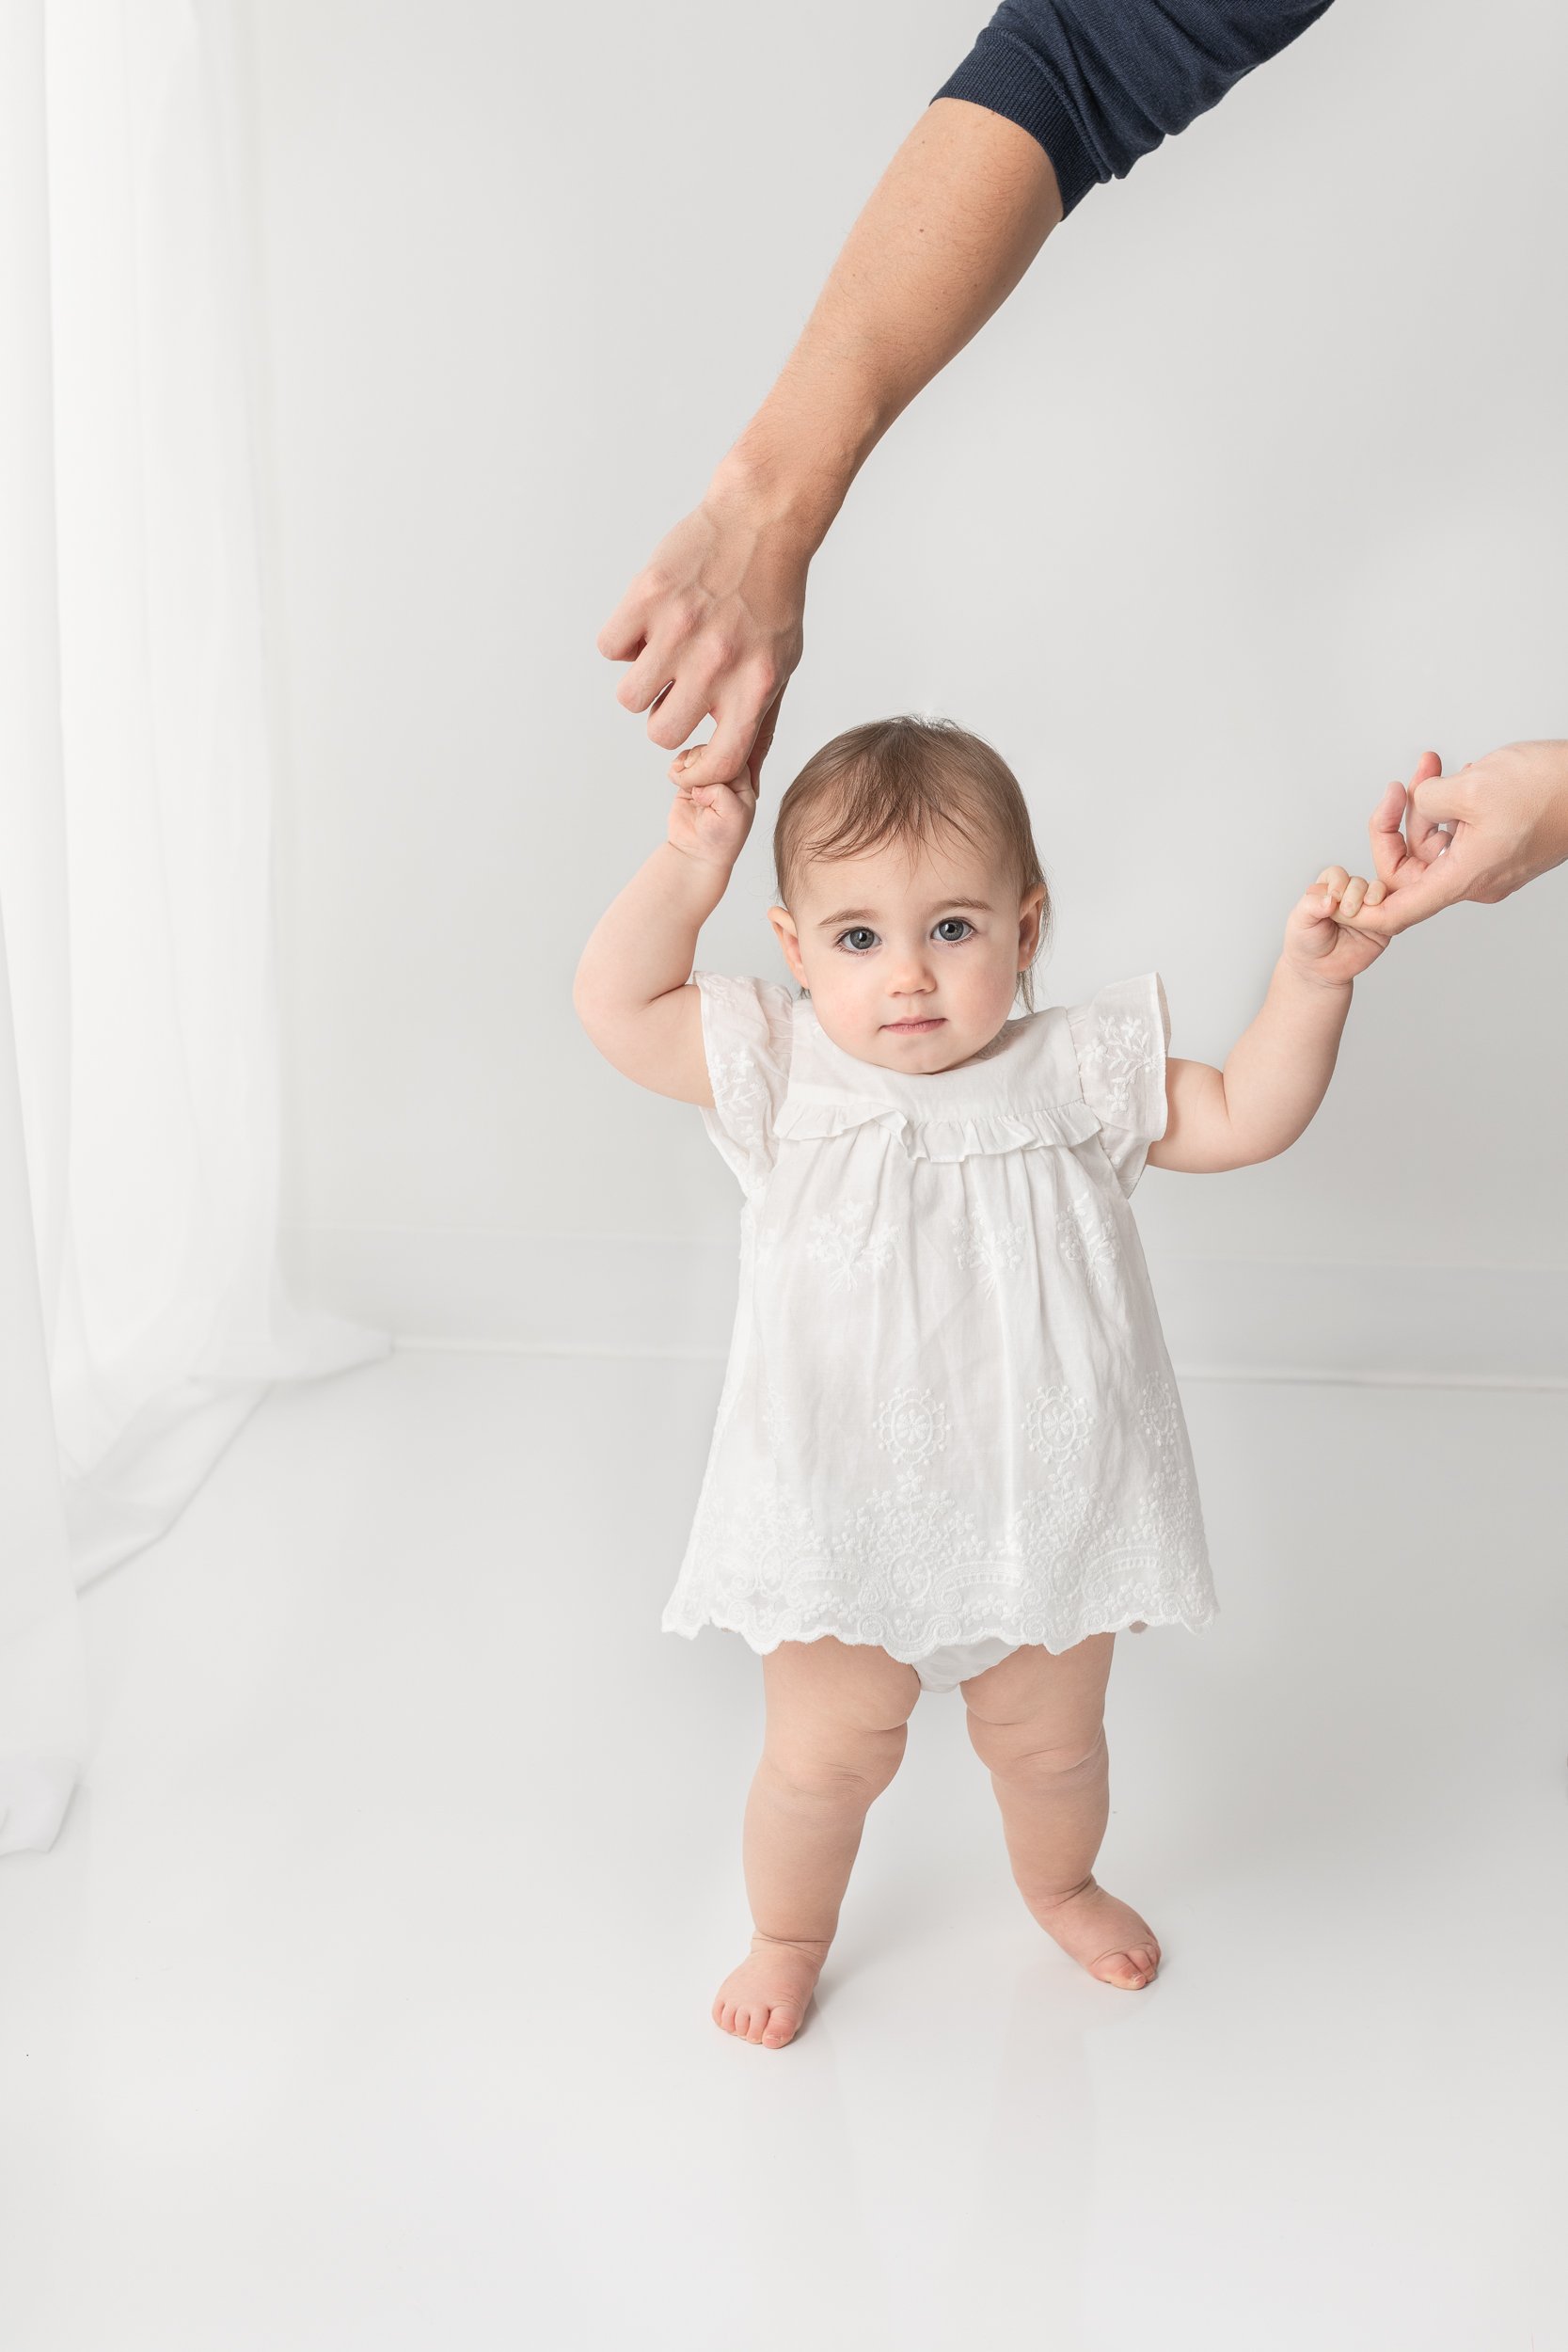   First birthday portrait of baby girl walking holding dads hands. First birthday photo inspiration baby photos pose ideas #EssexCountyFamilyPhotographer #MorrisCountyFamilyPhotographer #NorthernNewJerseyFamilyPhotographer #ManhattanPhotographer #Pas